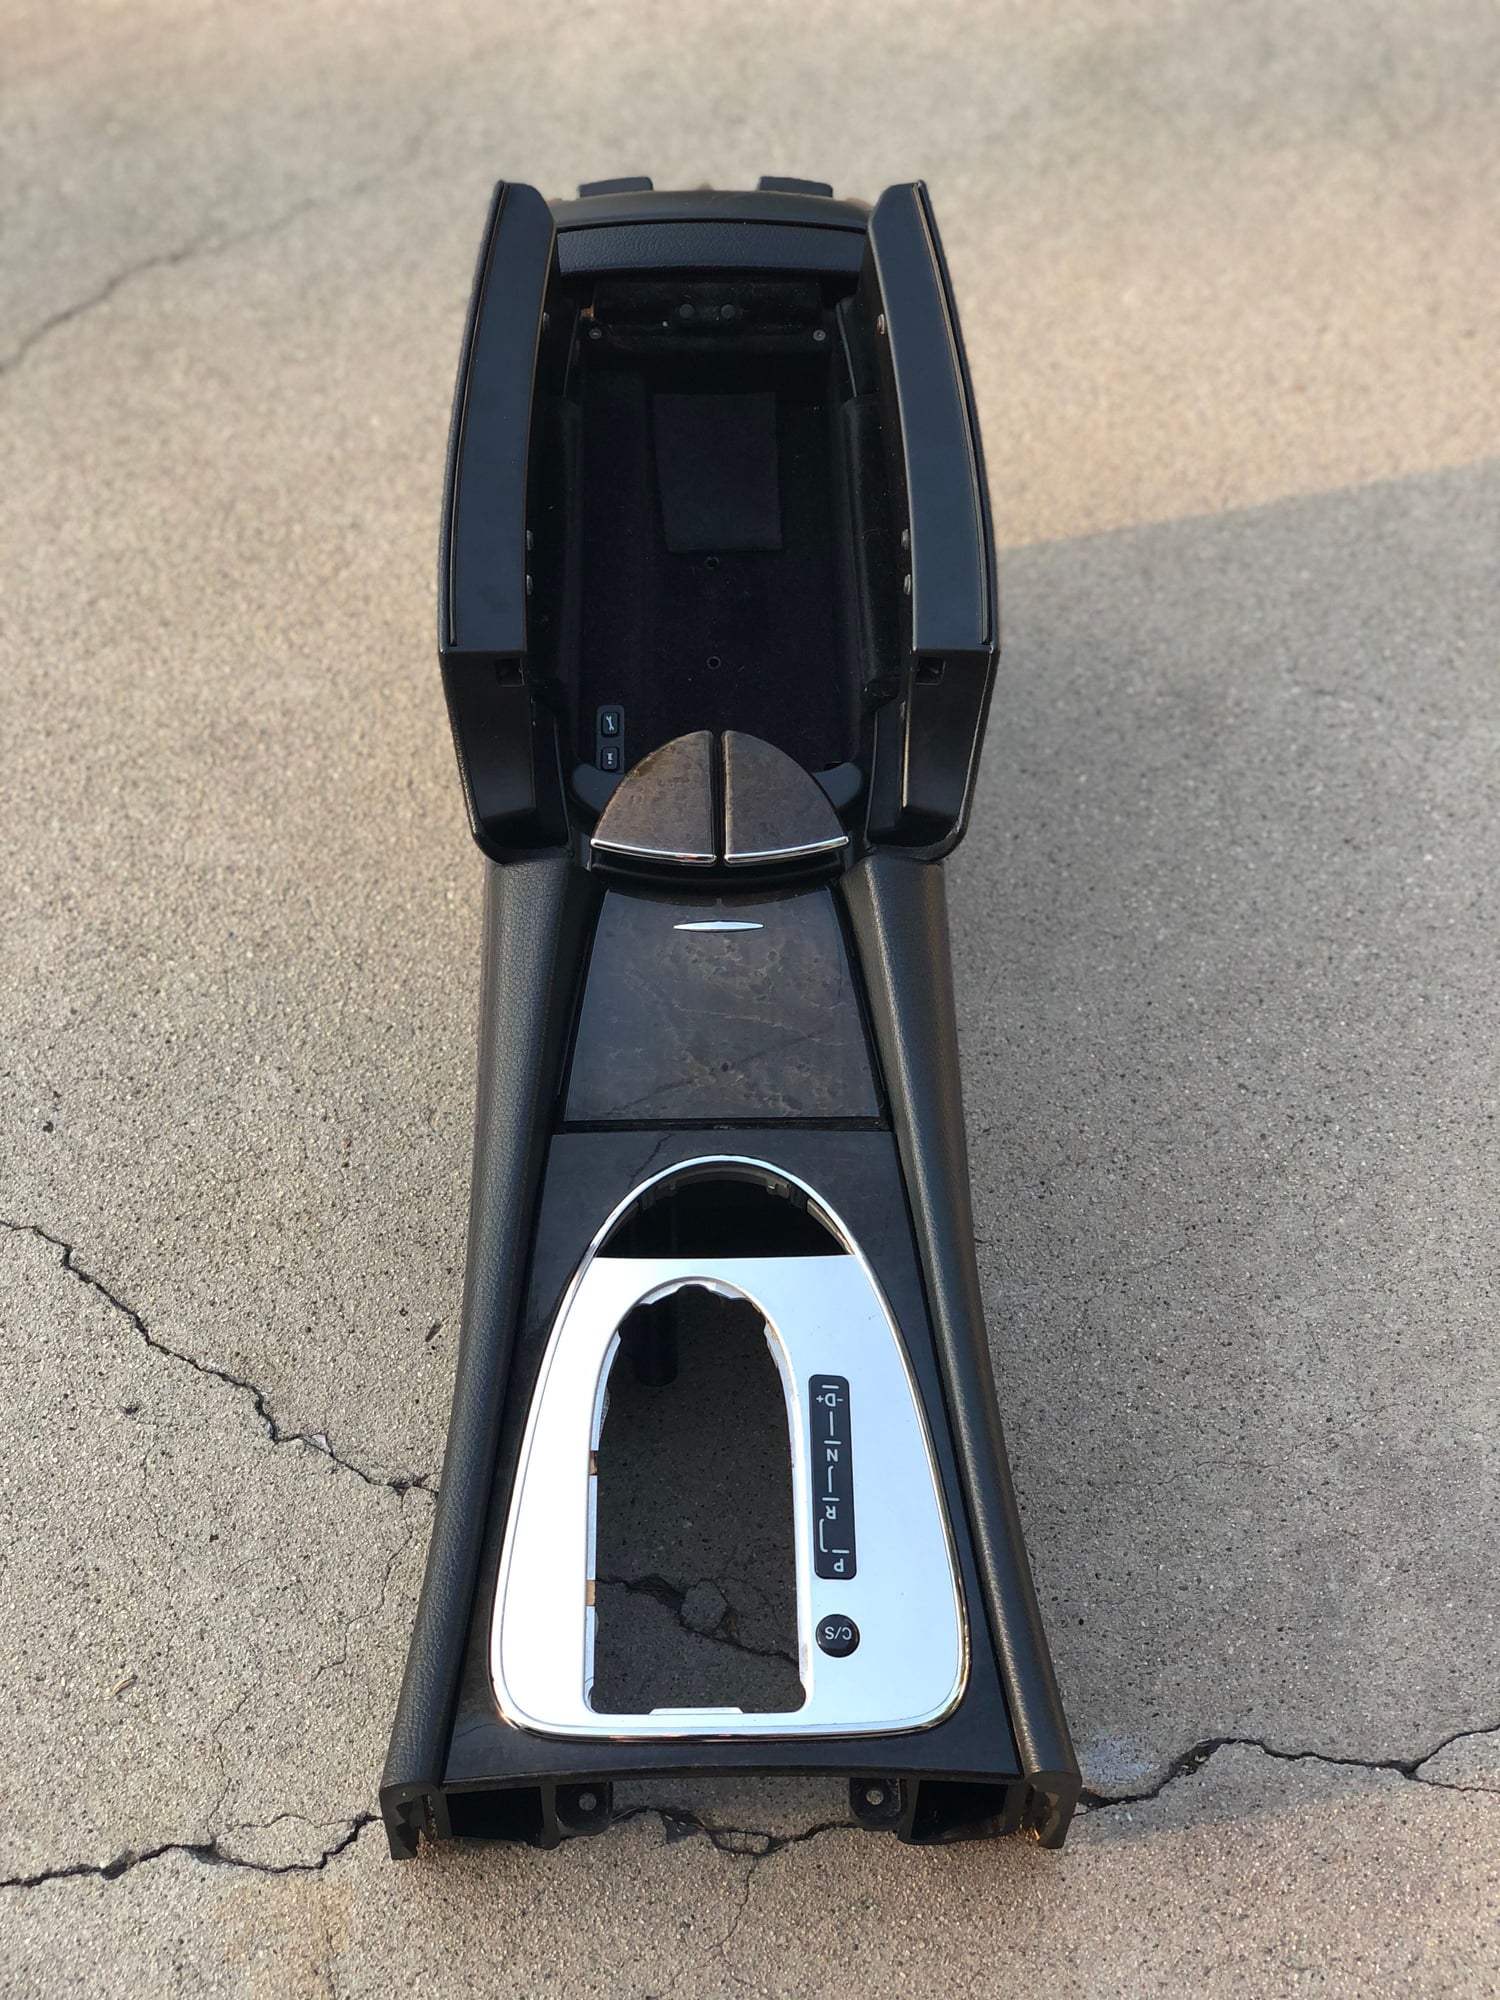 Interior/Upholstery - 2003-2009 Mercedes Benz E-Class Center Console - Used - 2003 to 2009 Mercedes-Benz E320 - 2003 to 2006 Mercedes-Benz E500 - 2006 to 2009 Mercedes-Benz E350 - 2007 to 2009 Mercedes-Benz E550 - 2003 to 2006 Mercedes-Benz E55 AMG - 2007 to 2009 Mercedes-Benz E63 AMG - Van Nuys, CA 91411, United States